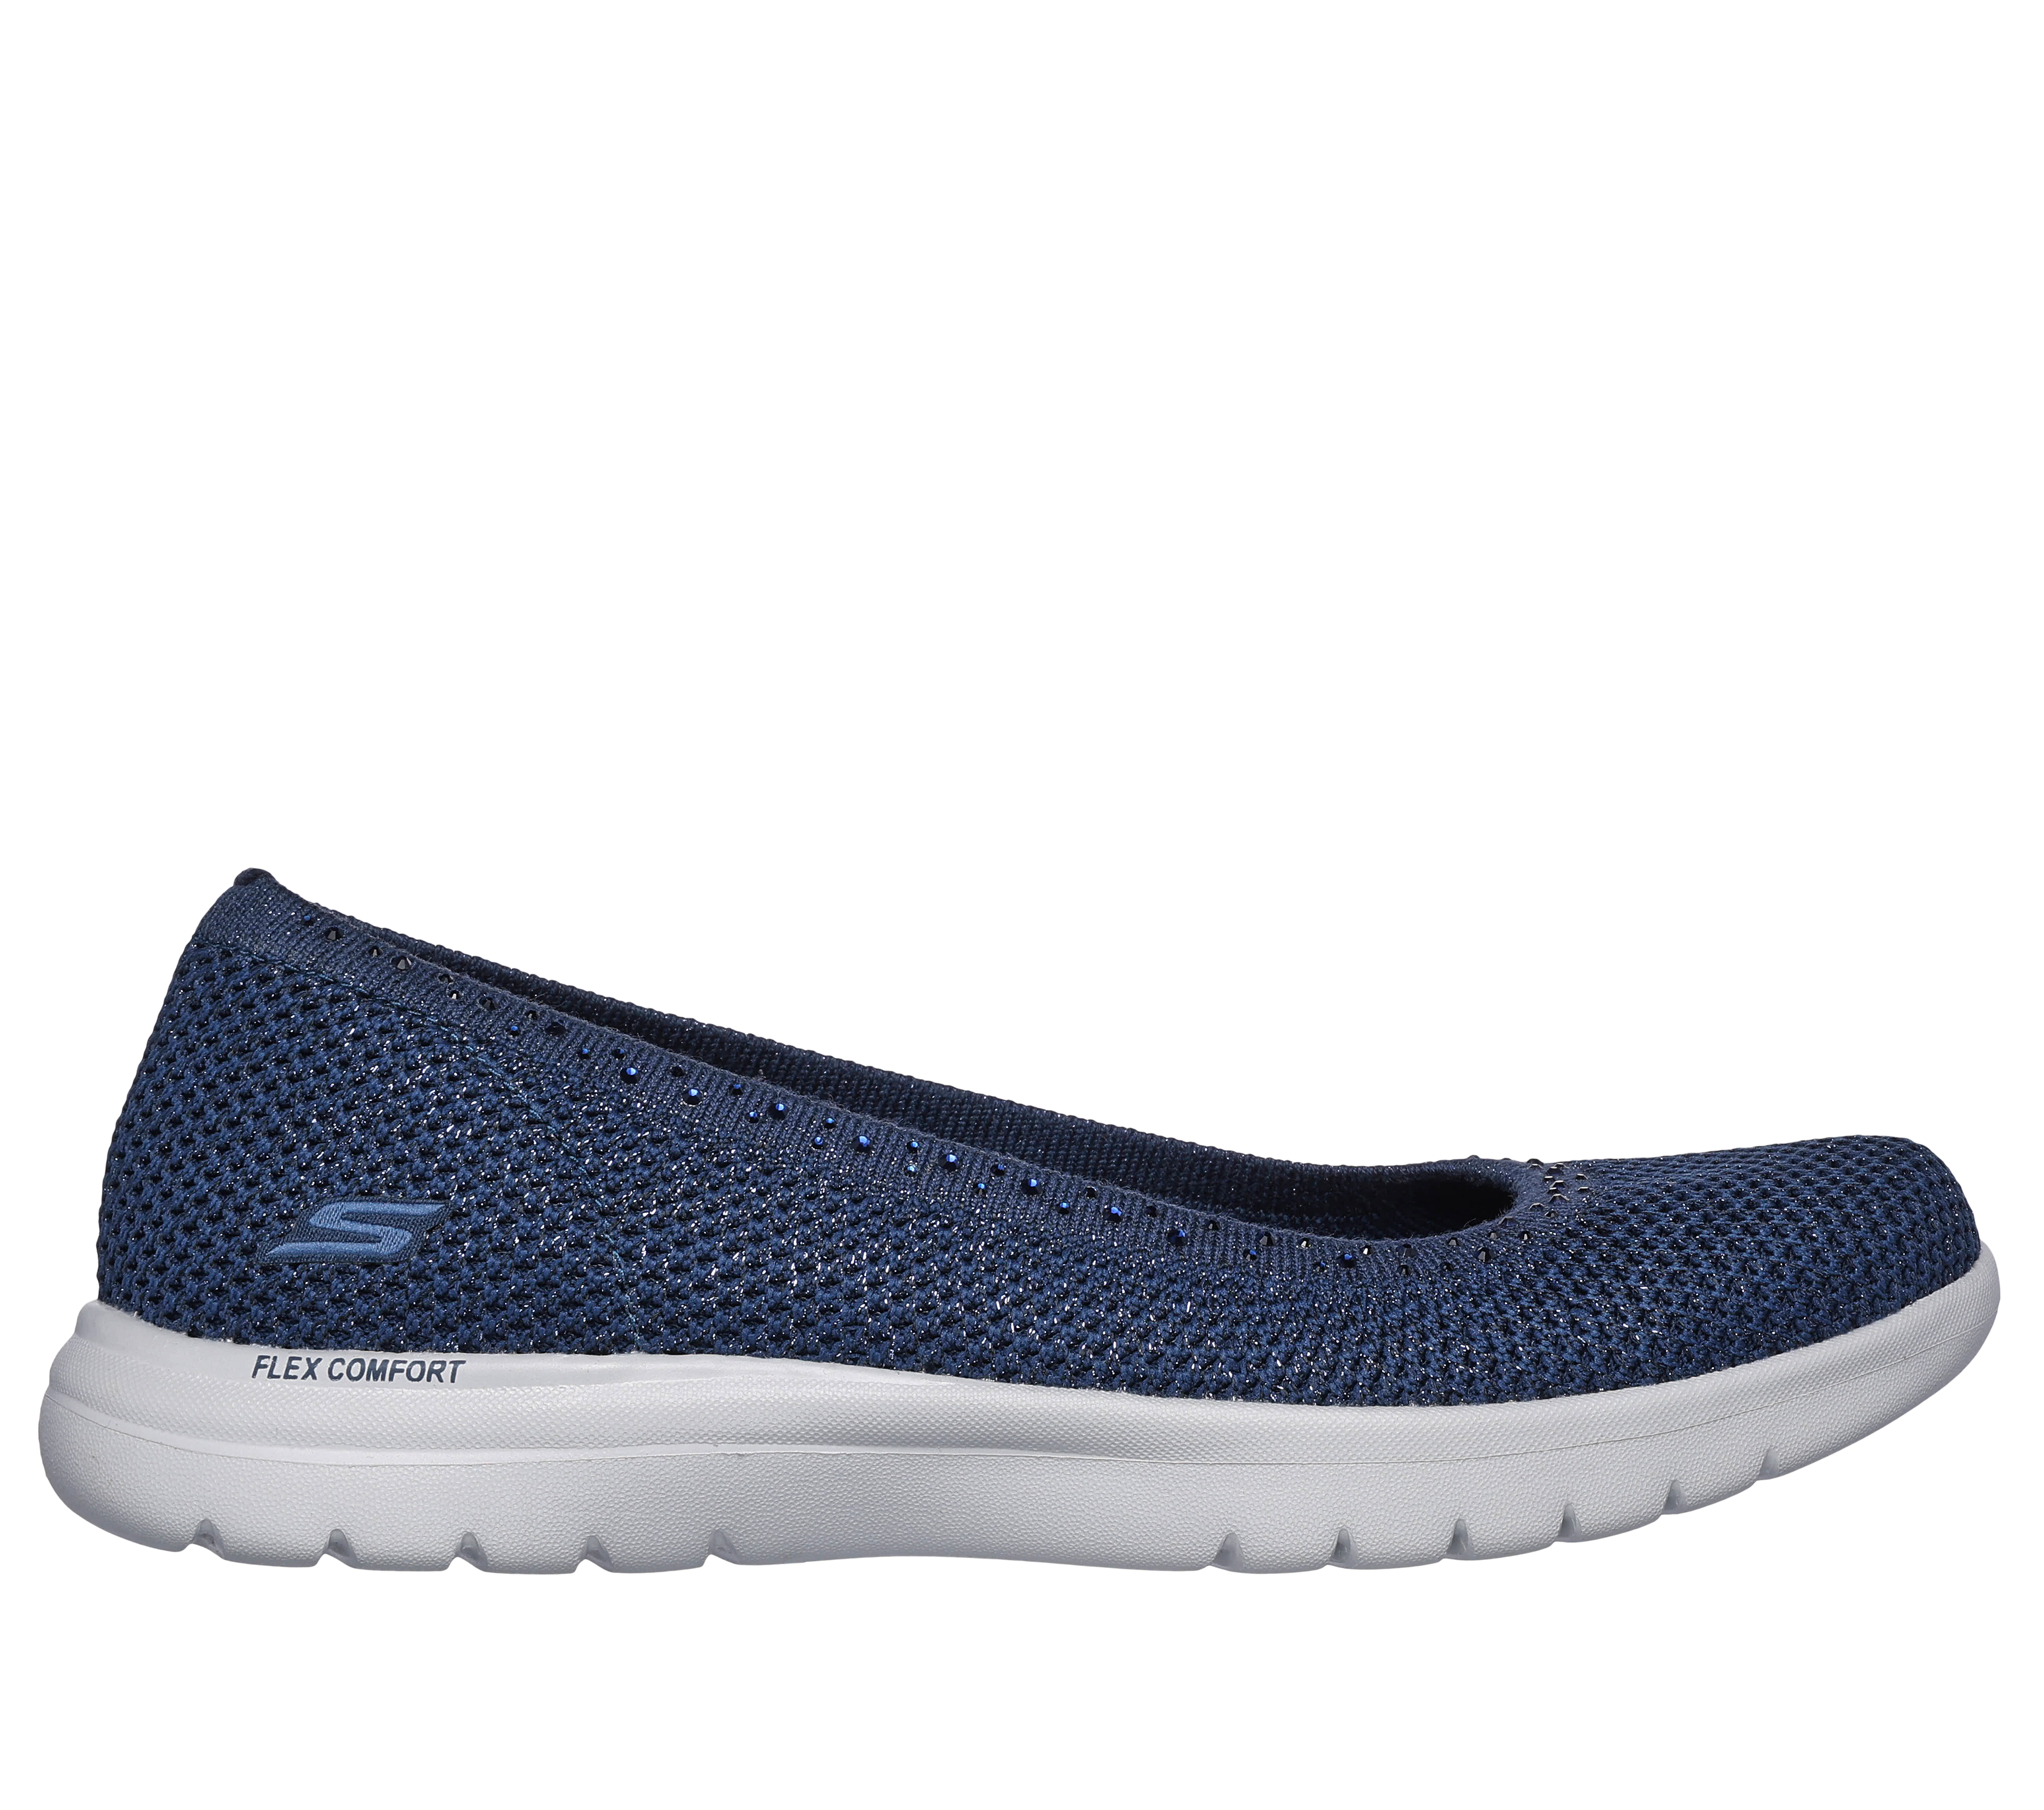 Shop the On-the-GO Flex - Bejeweled | SKECHERS CA